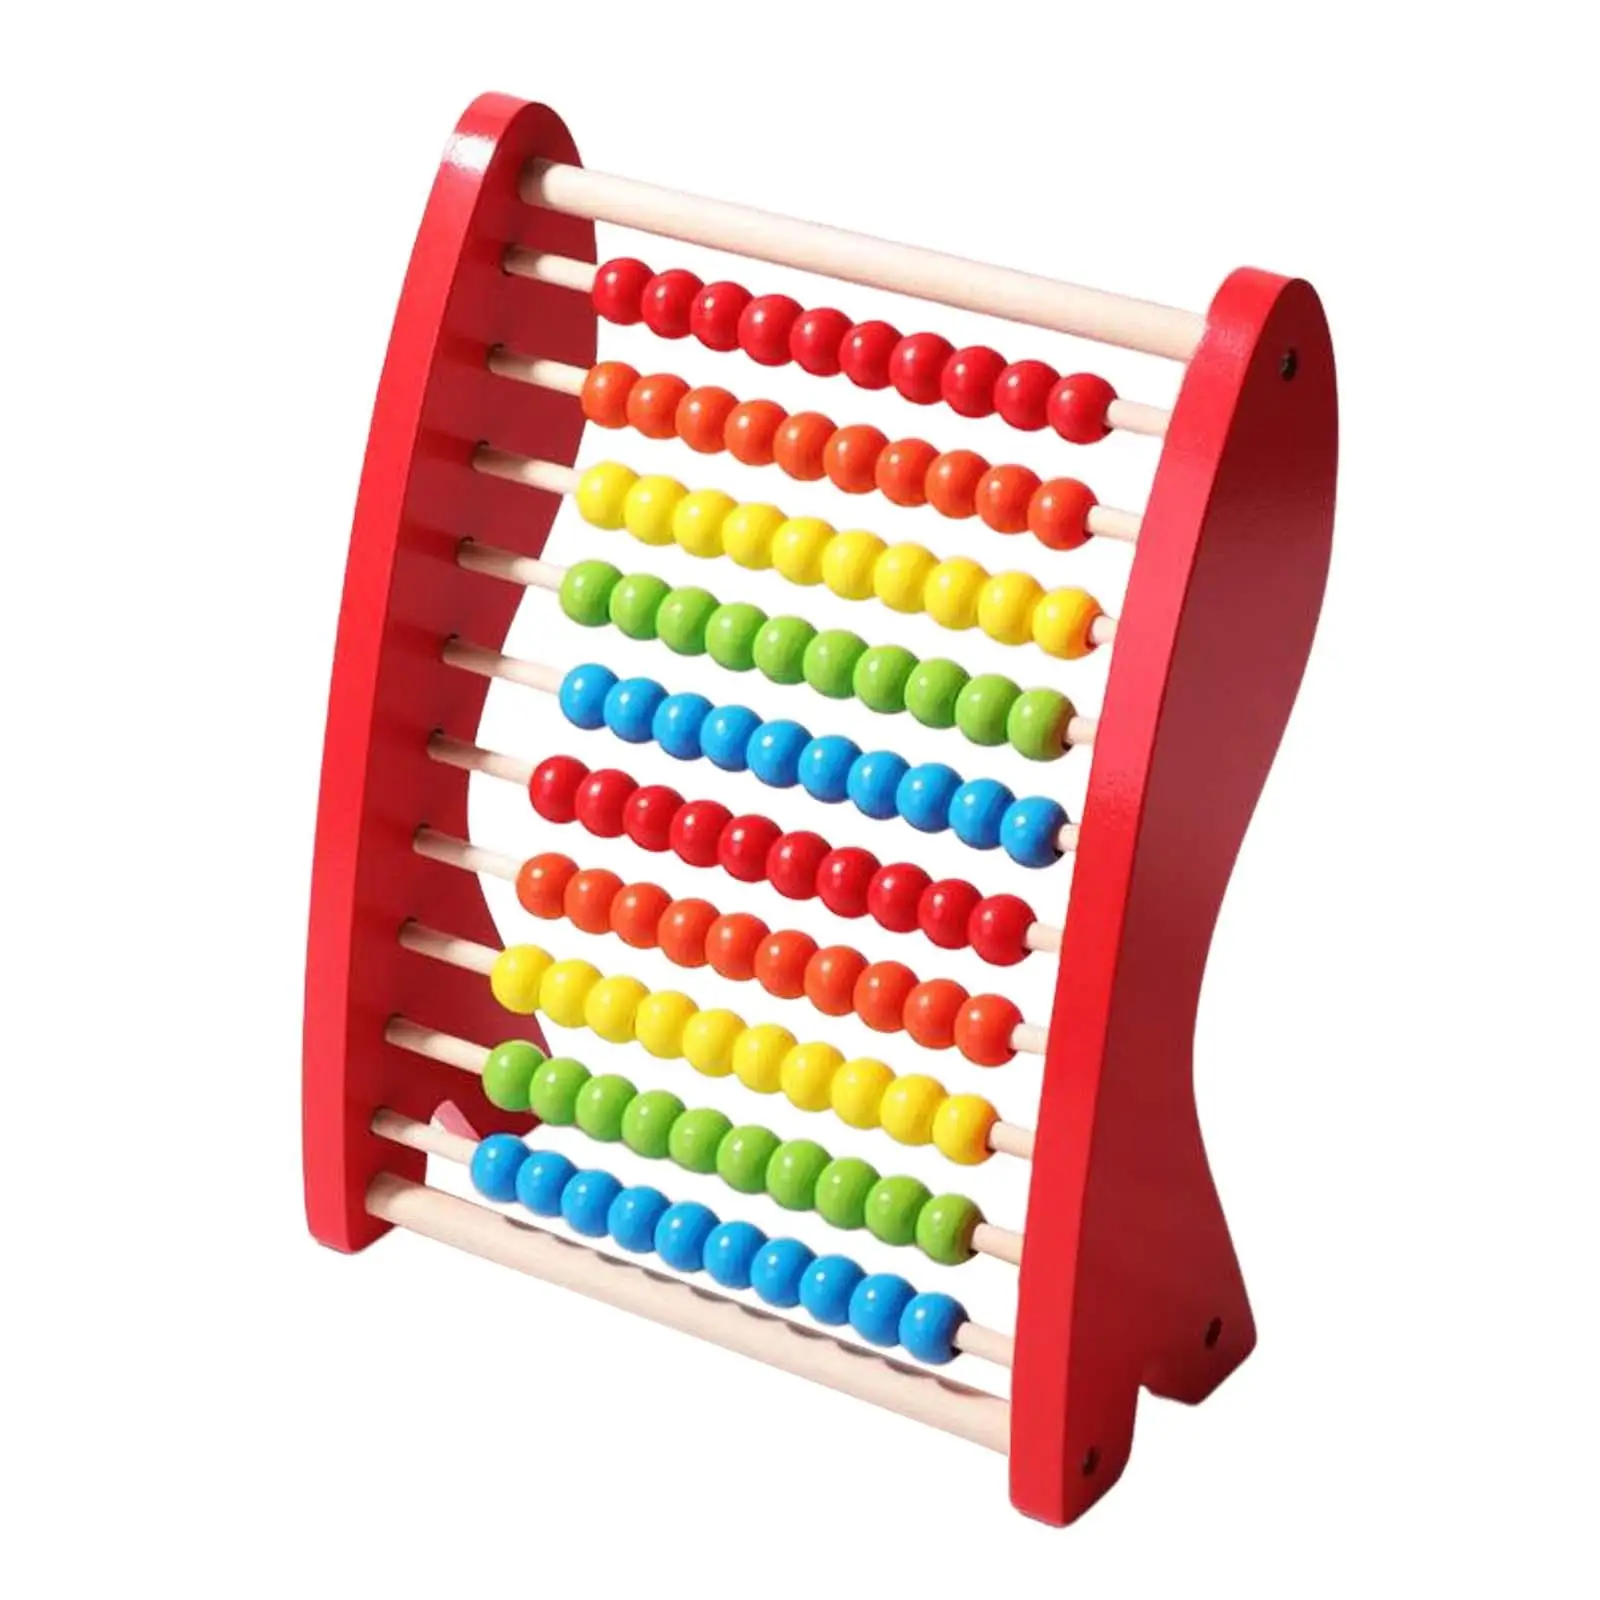 Wooden Abacus Ten Frame Set Calculating Beads Toys Educational Counting Frames Toy for Boys Girls Kids Elementary Children Gifts